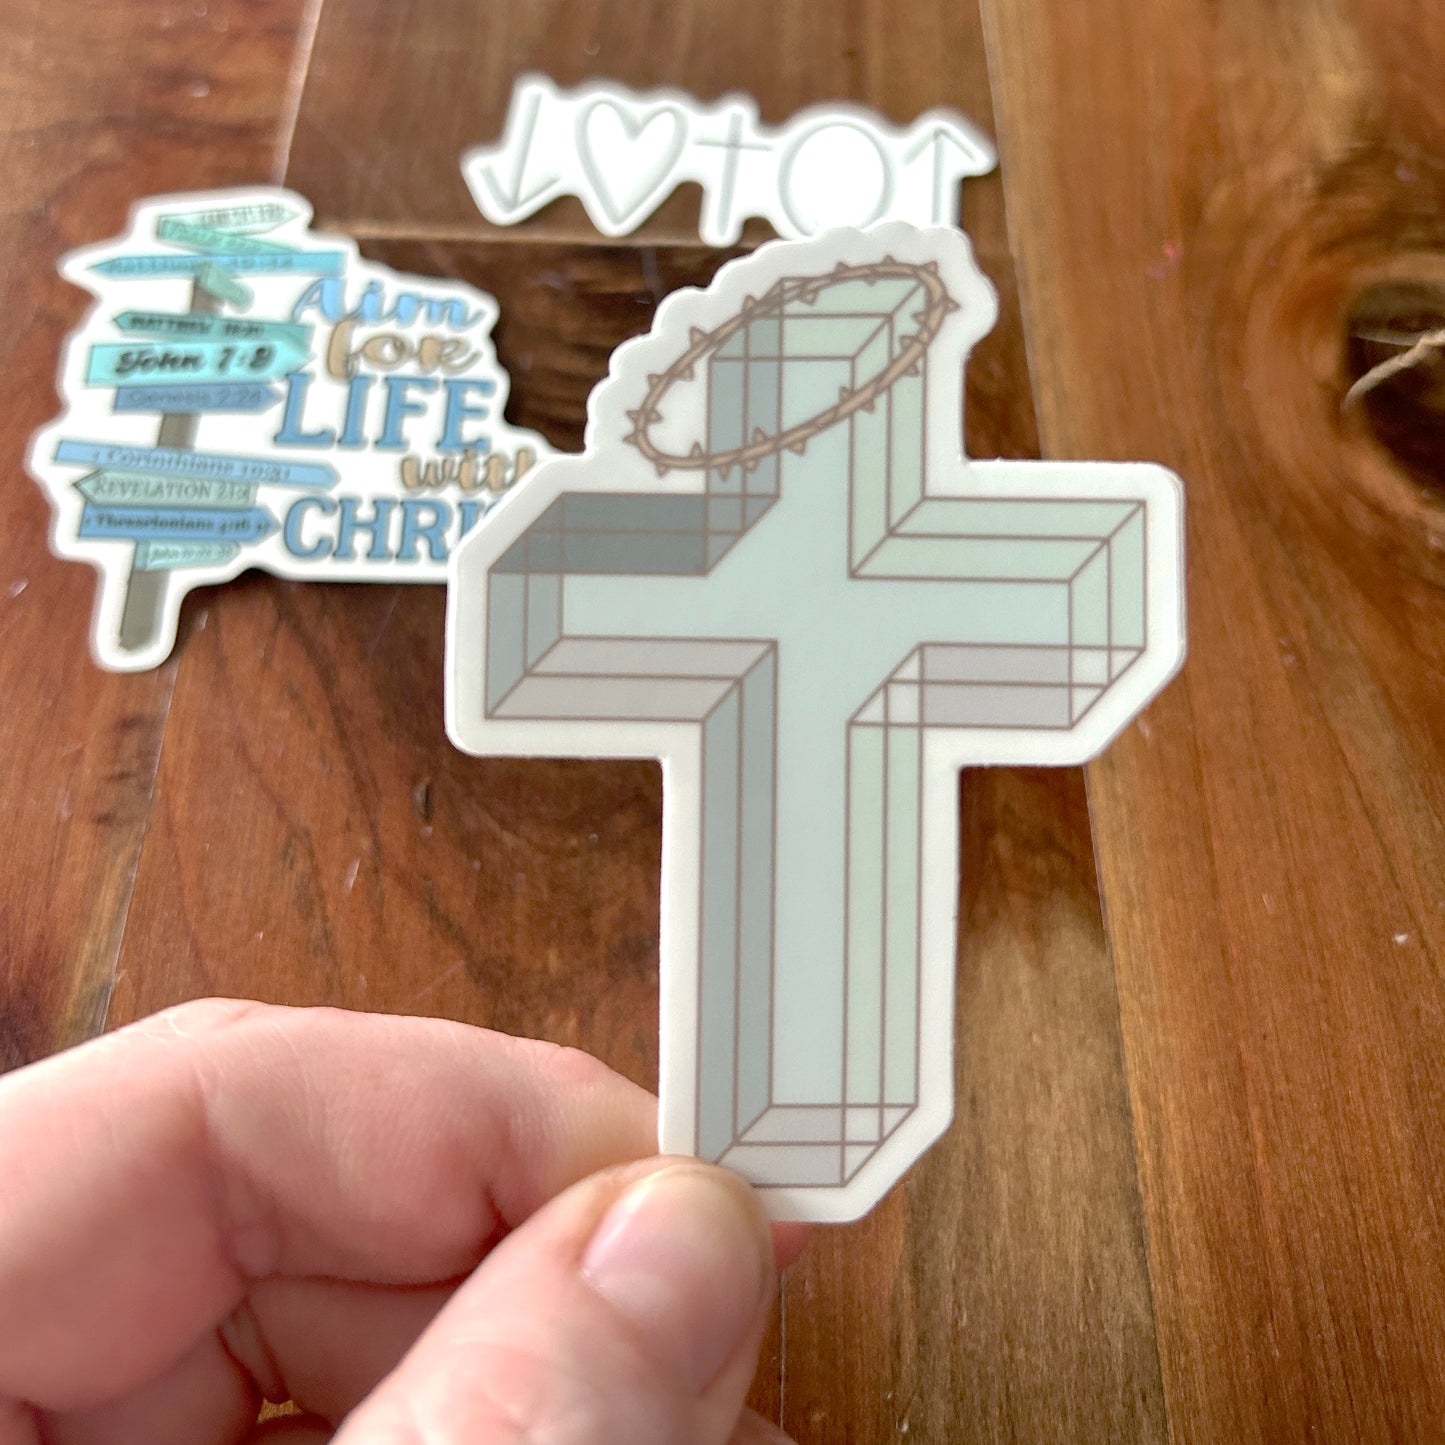 Christian Stickers